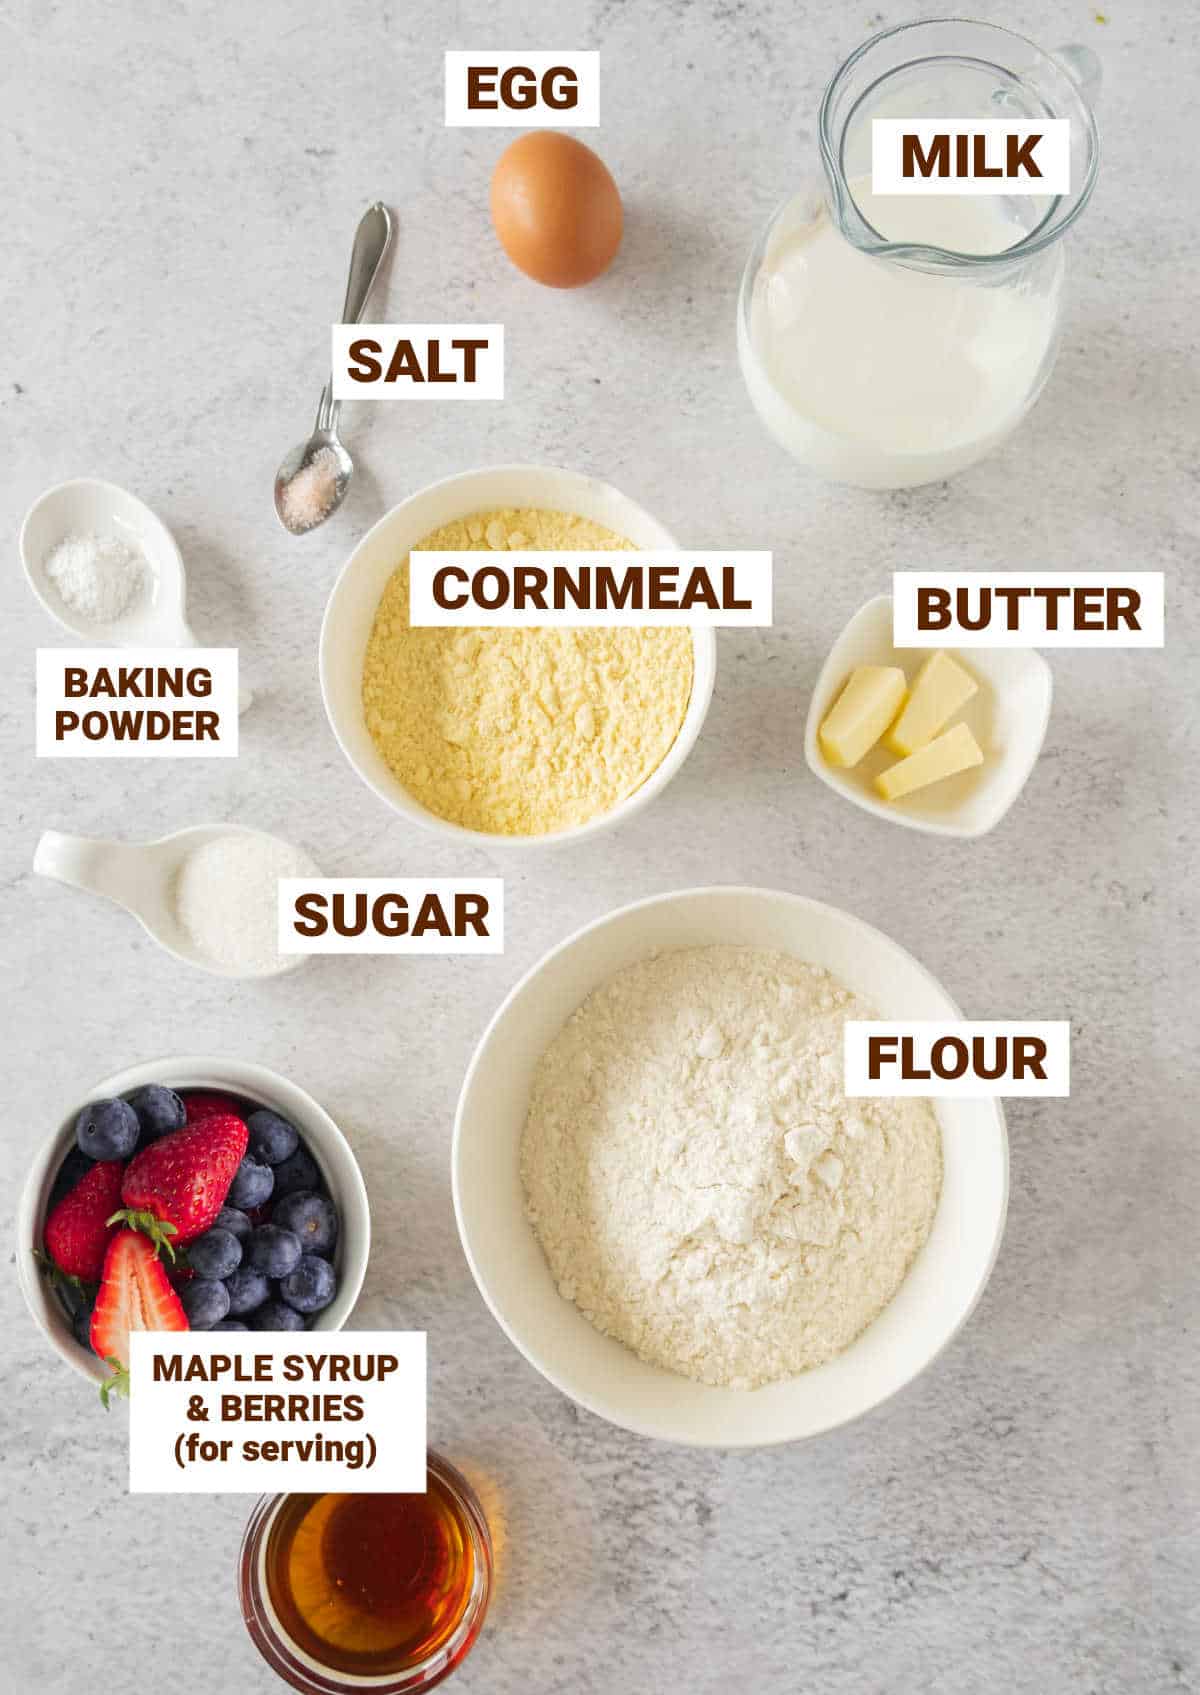 Grey surface with bowls containing ingredients for cornmeal pancakes including egg, milk, butter, syrup, berries, flour, salt.